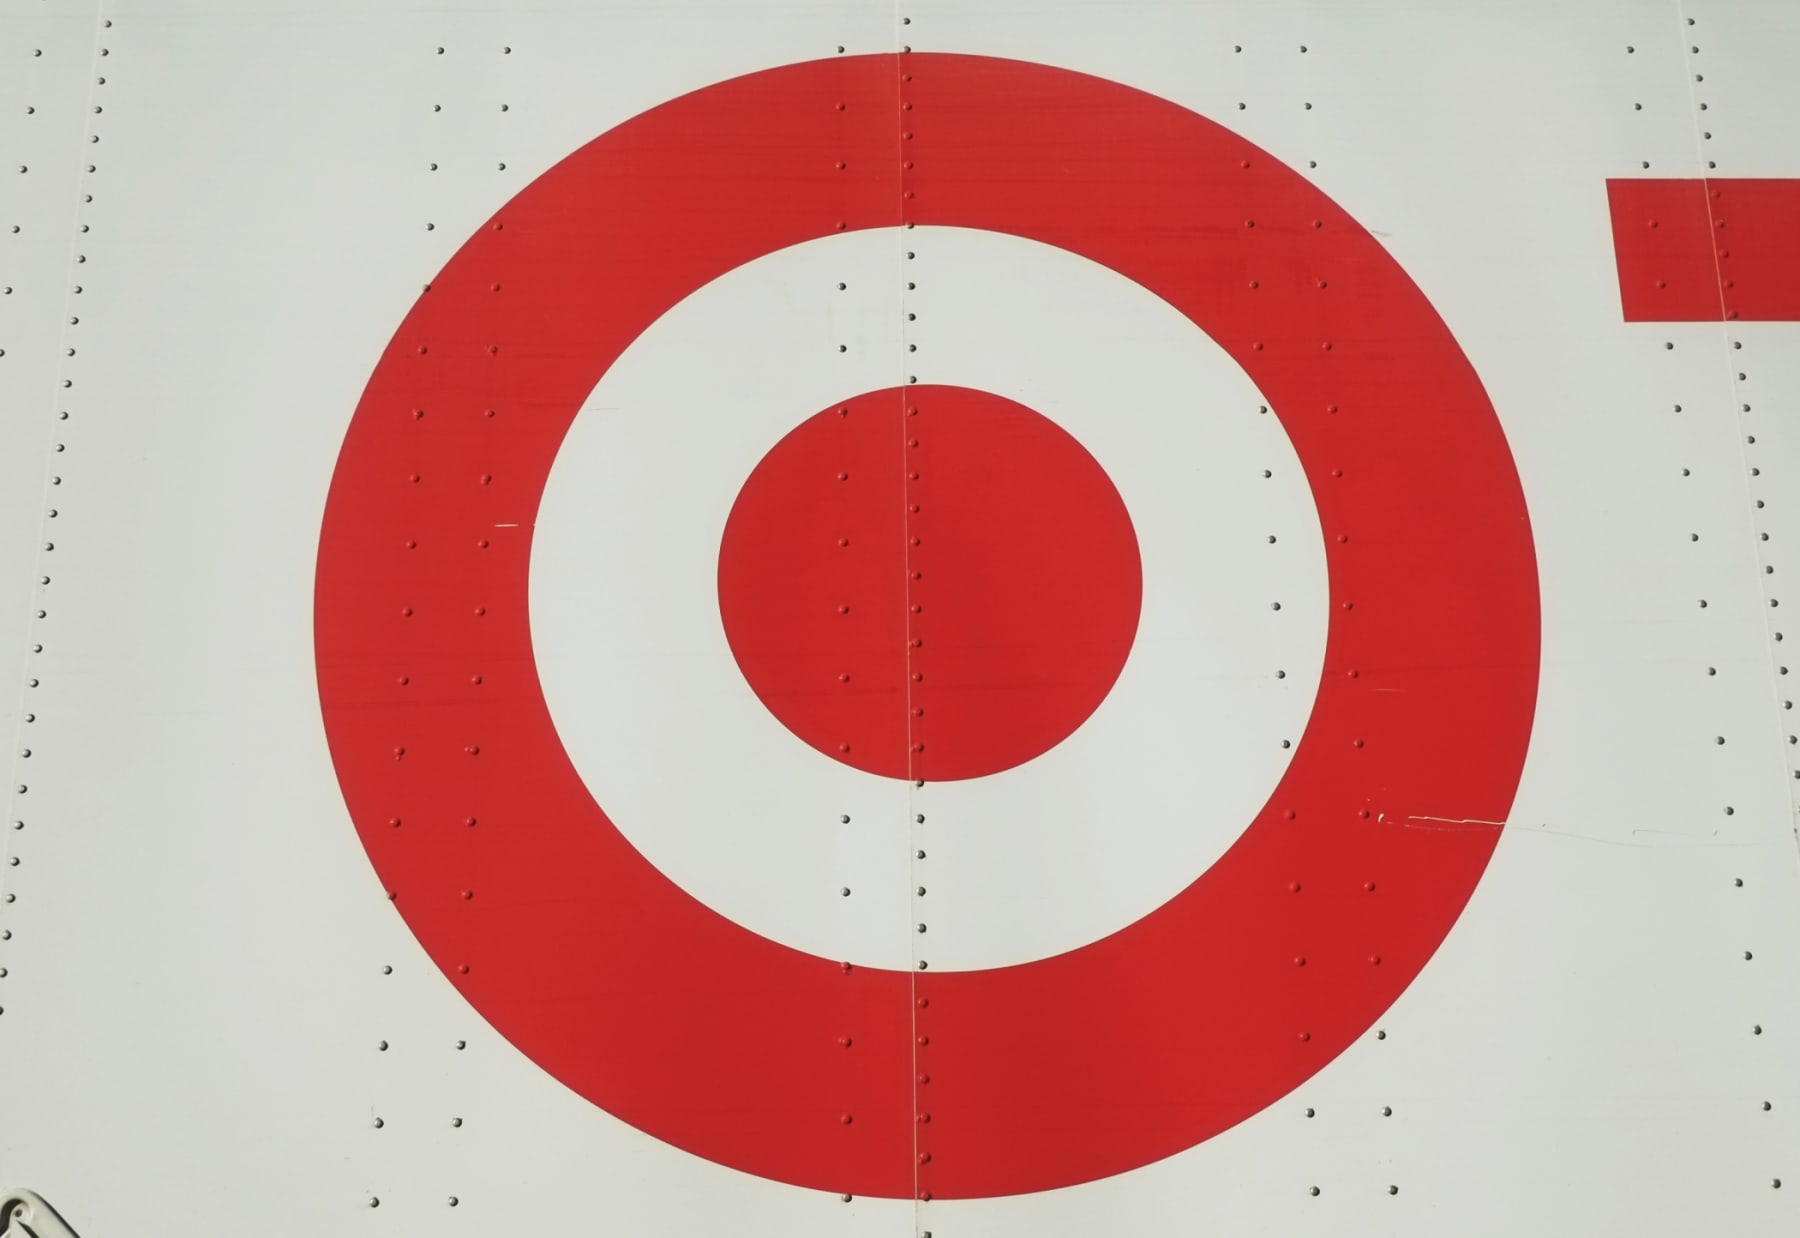 Target logo displayed on the side of the truck.